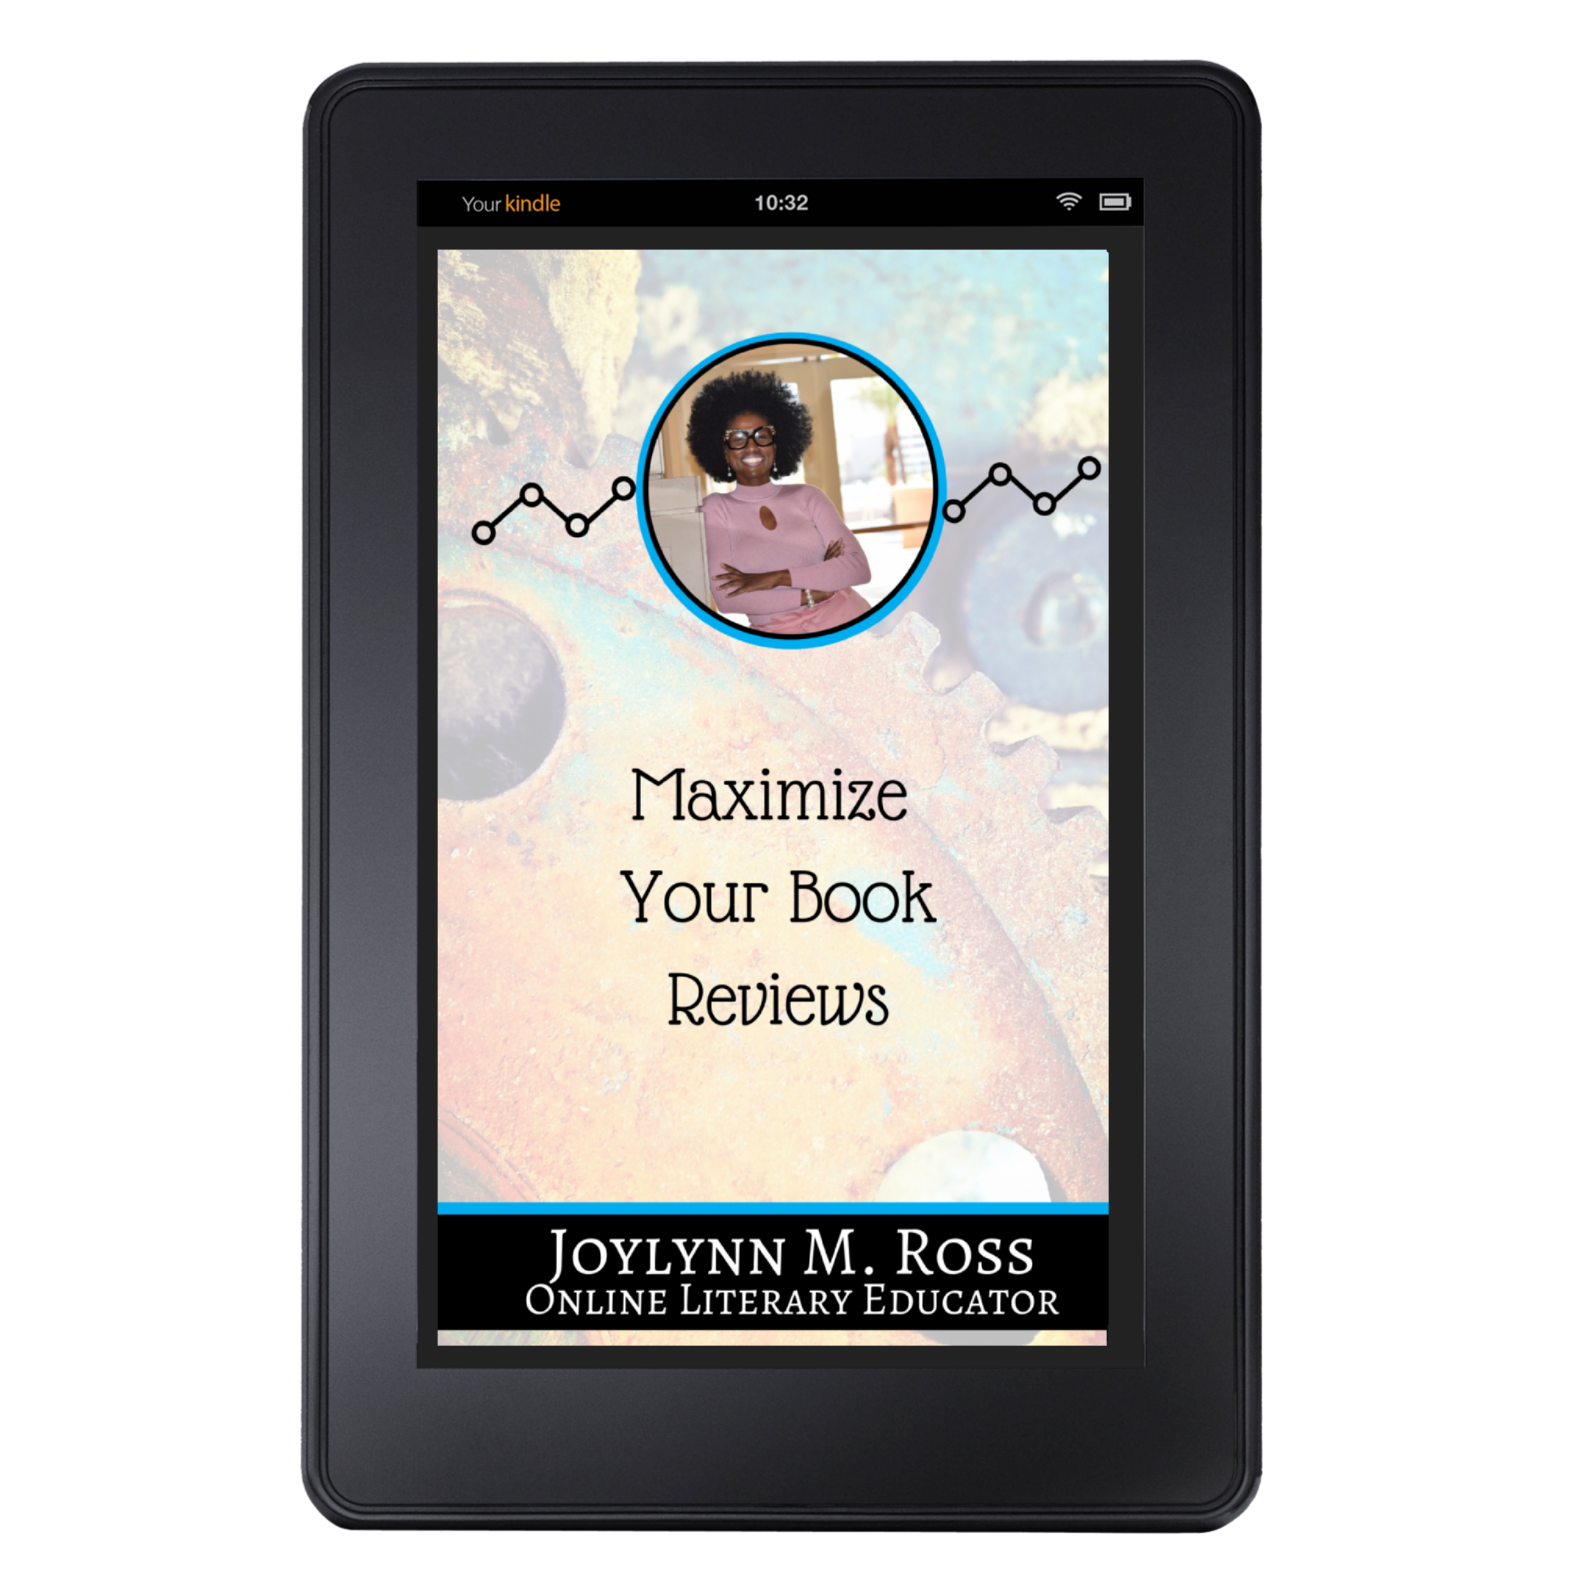 Maximize Your Book Reviews | Joylynn M. Ross | Online Literary Educator | The Literary "Know-it-all"